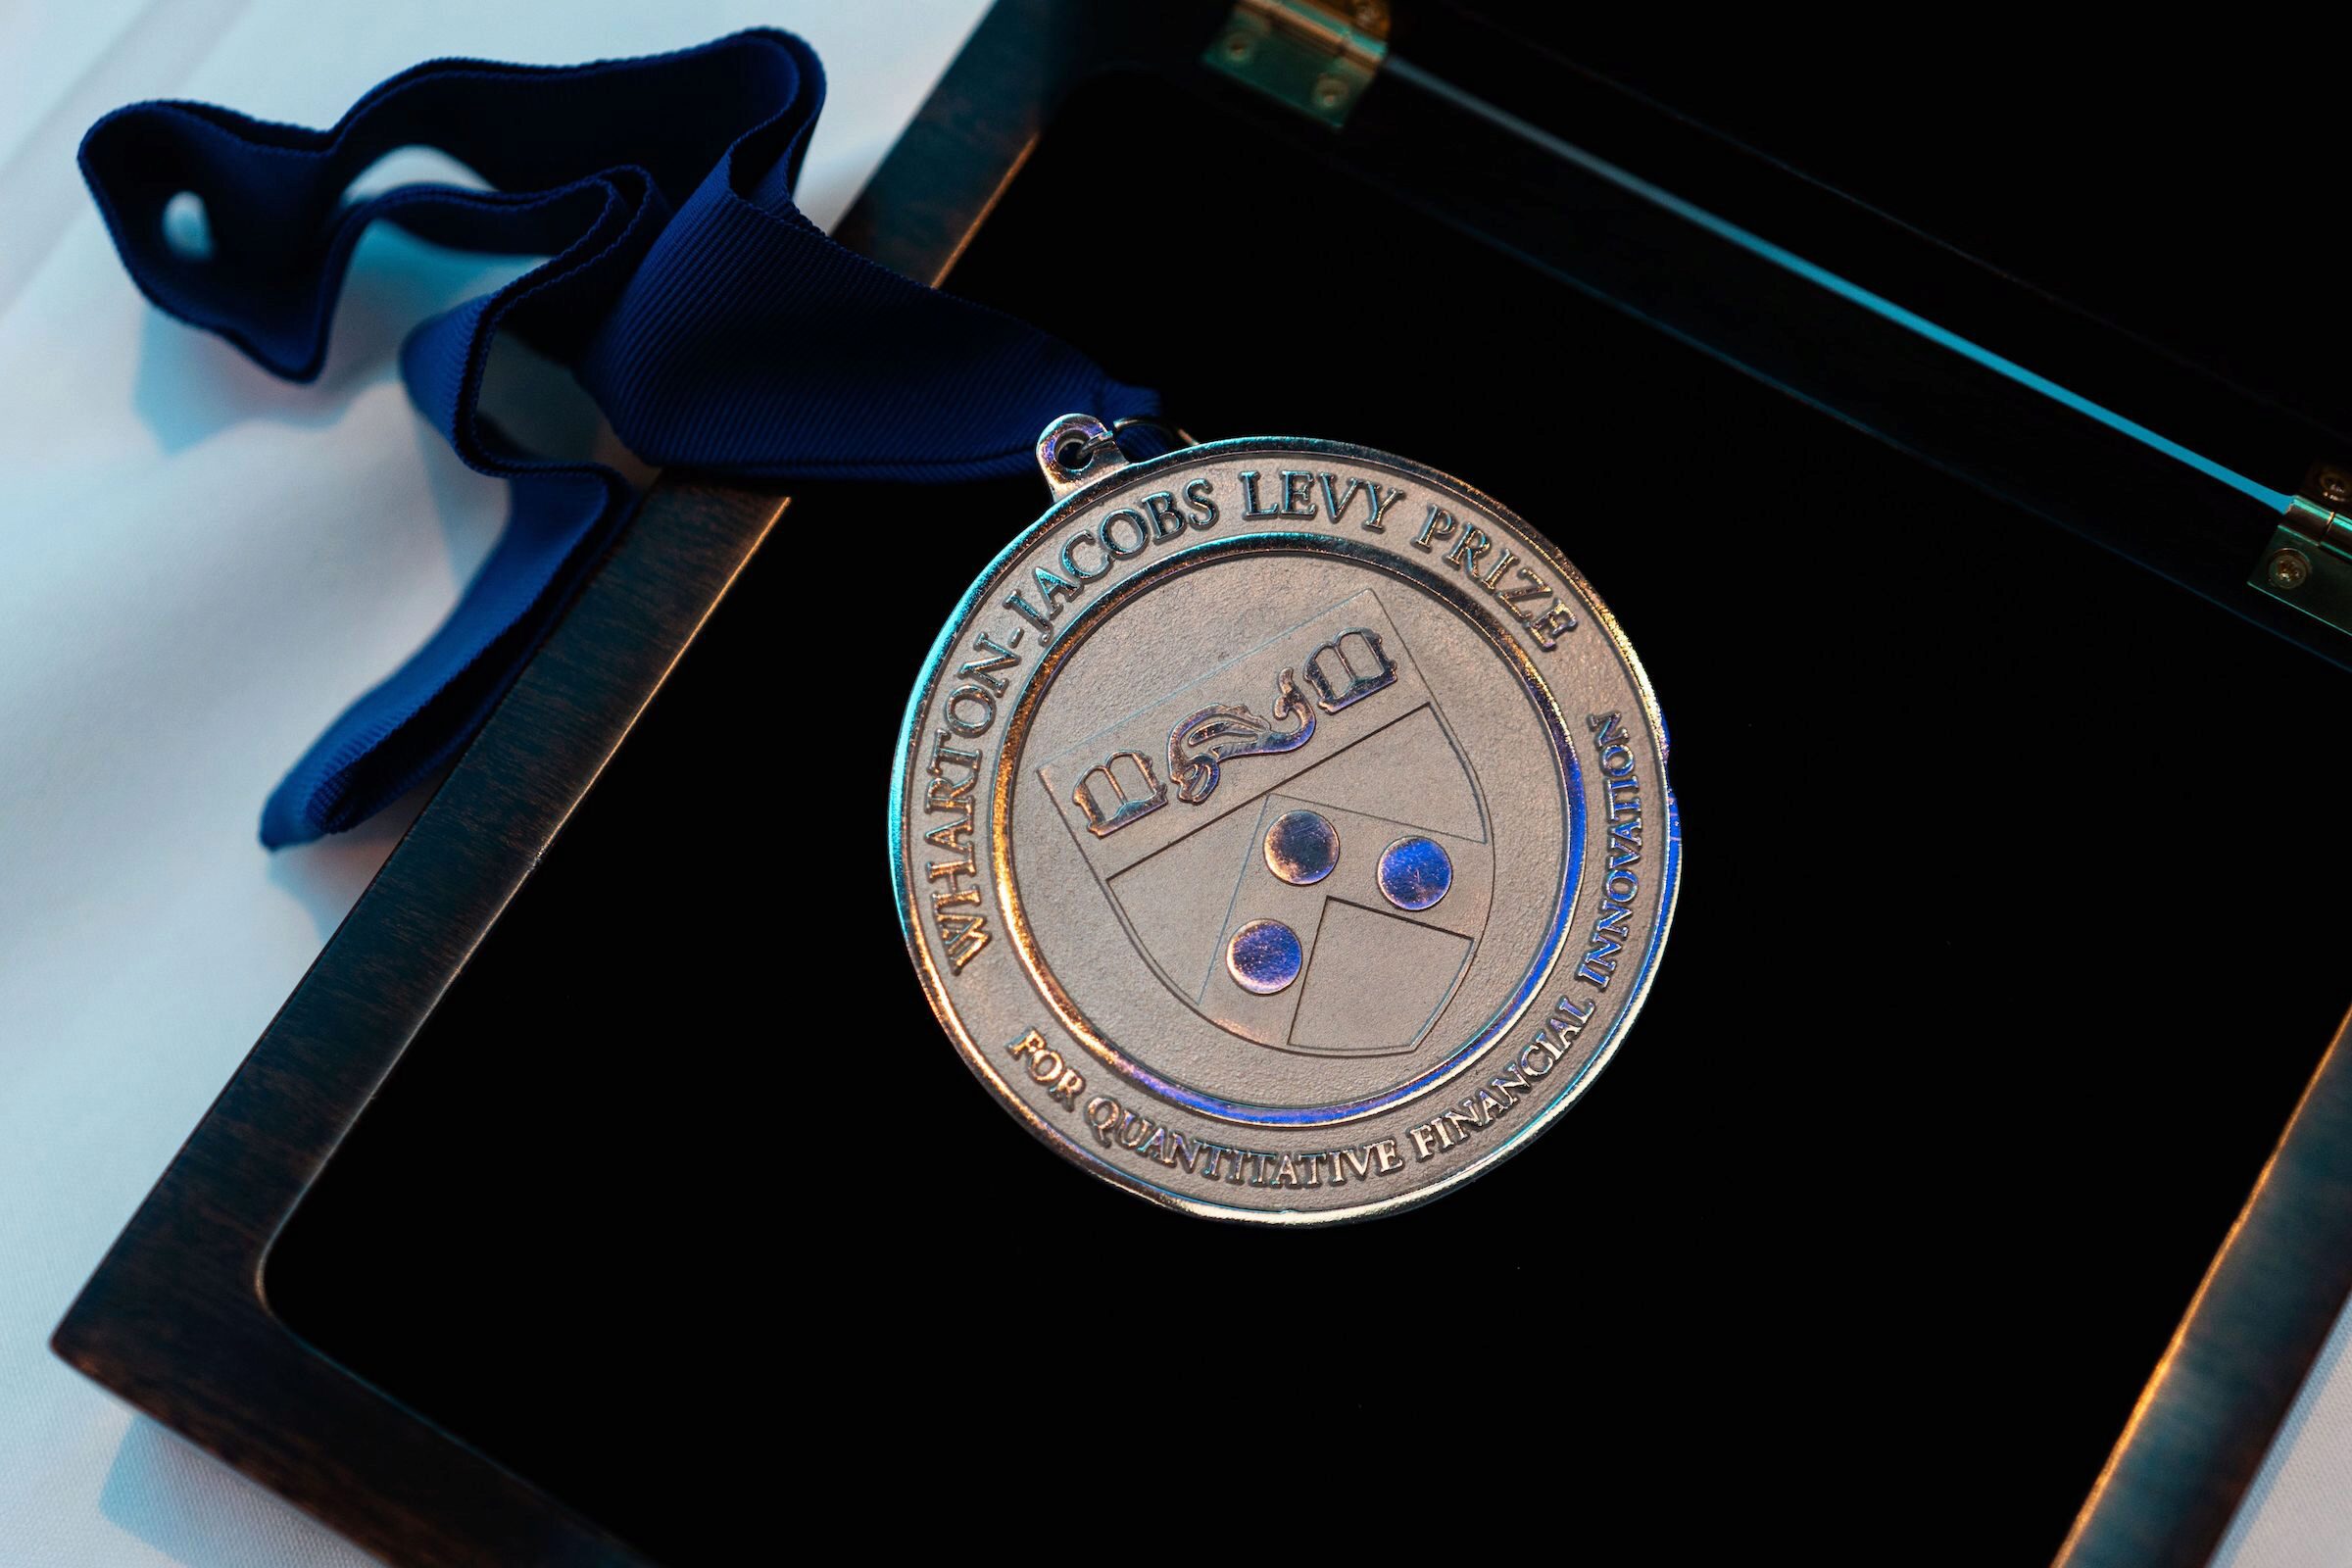 The front of the Jacobs Levy Prize medal